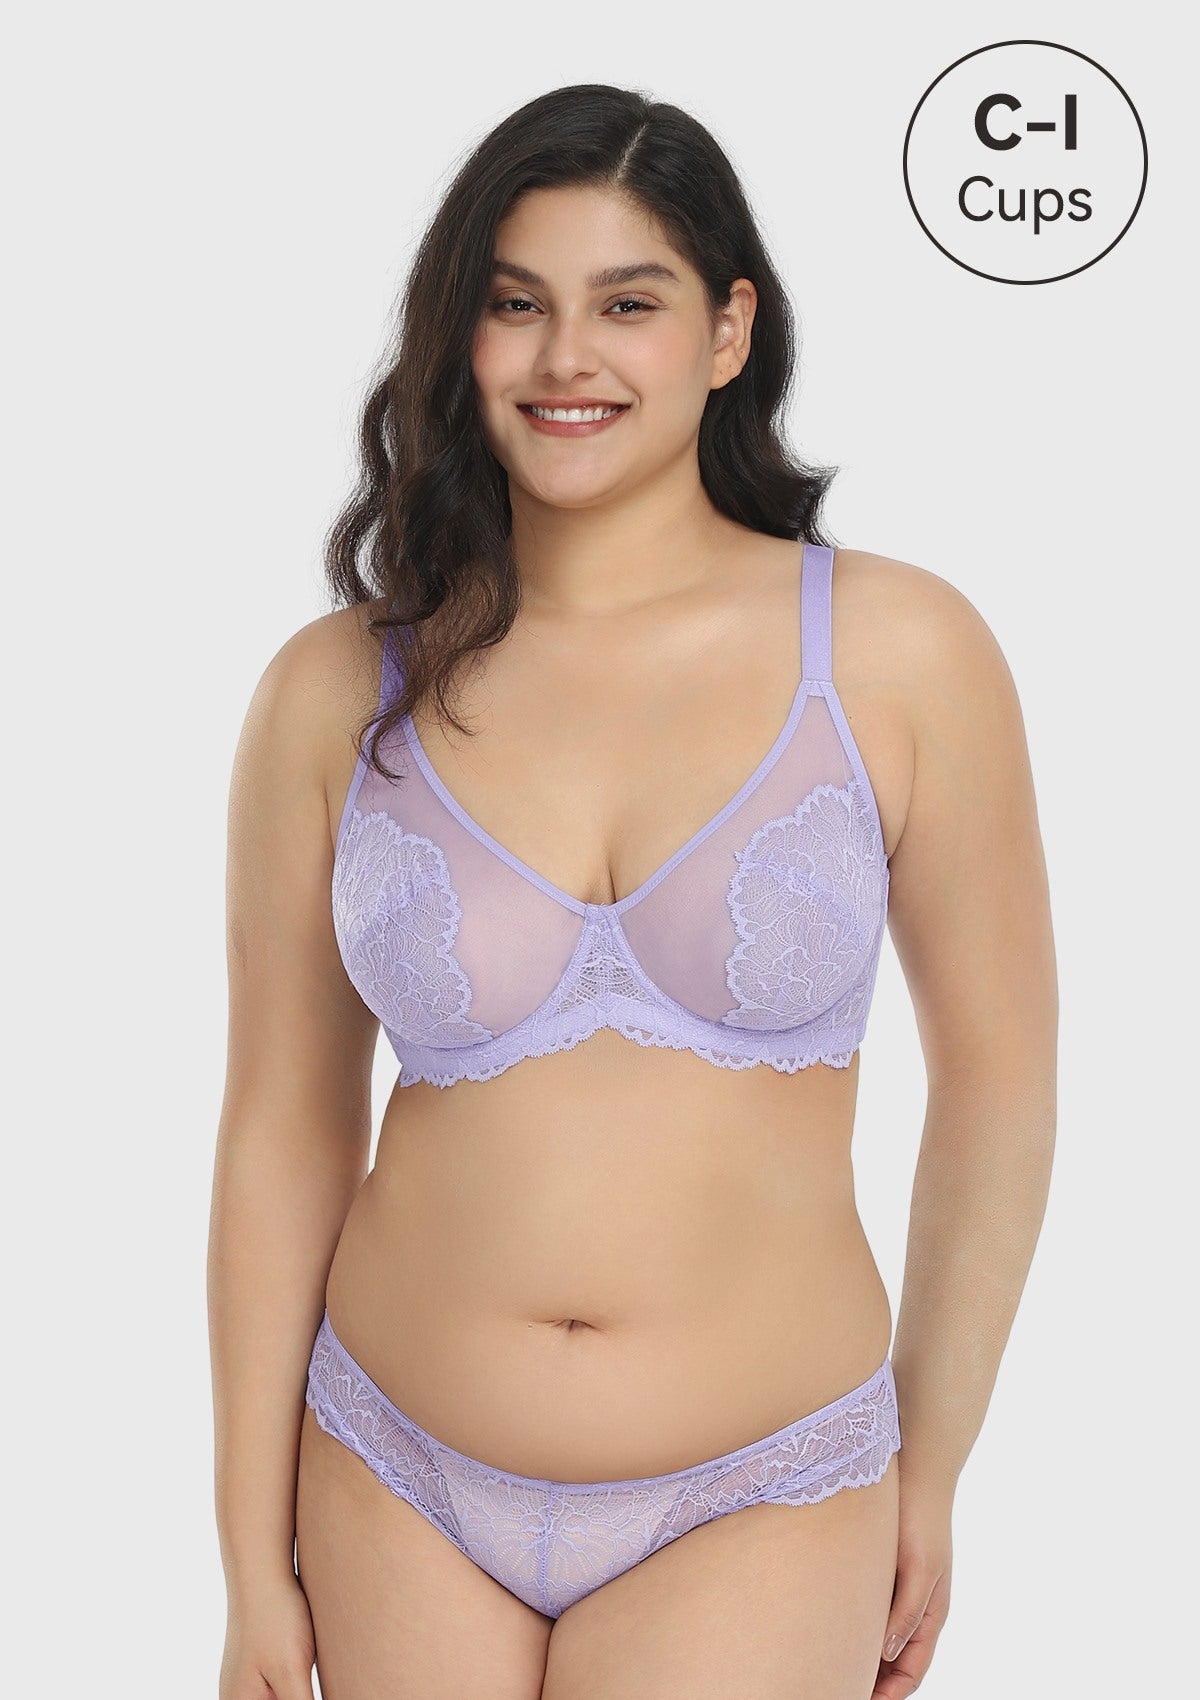 HSIA Blossom Transparent Lace Bra: Plus Size Wired Back Smoothing Bra - Light Purple / 34 / H